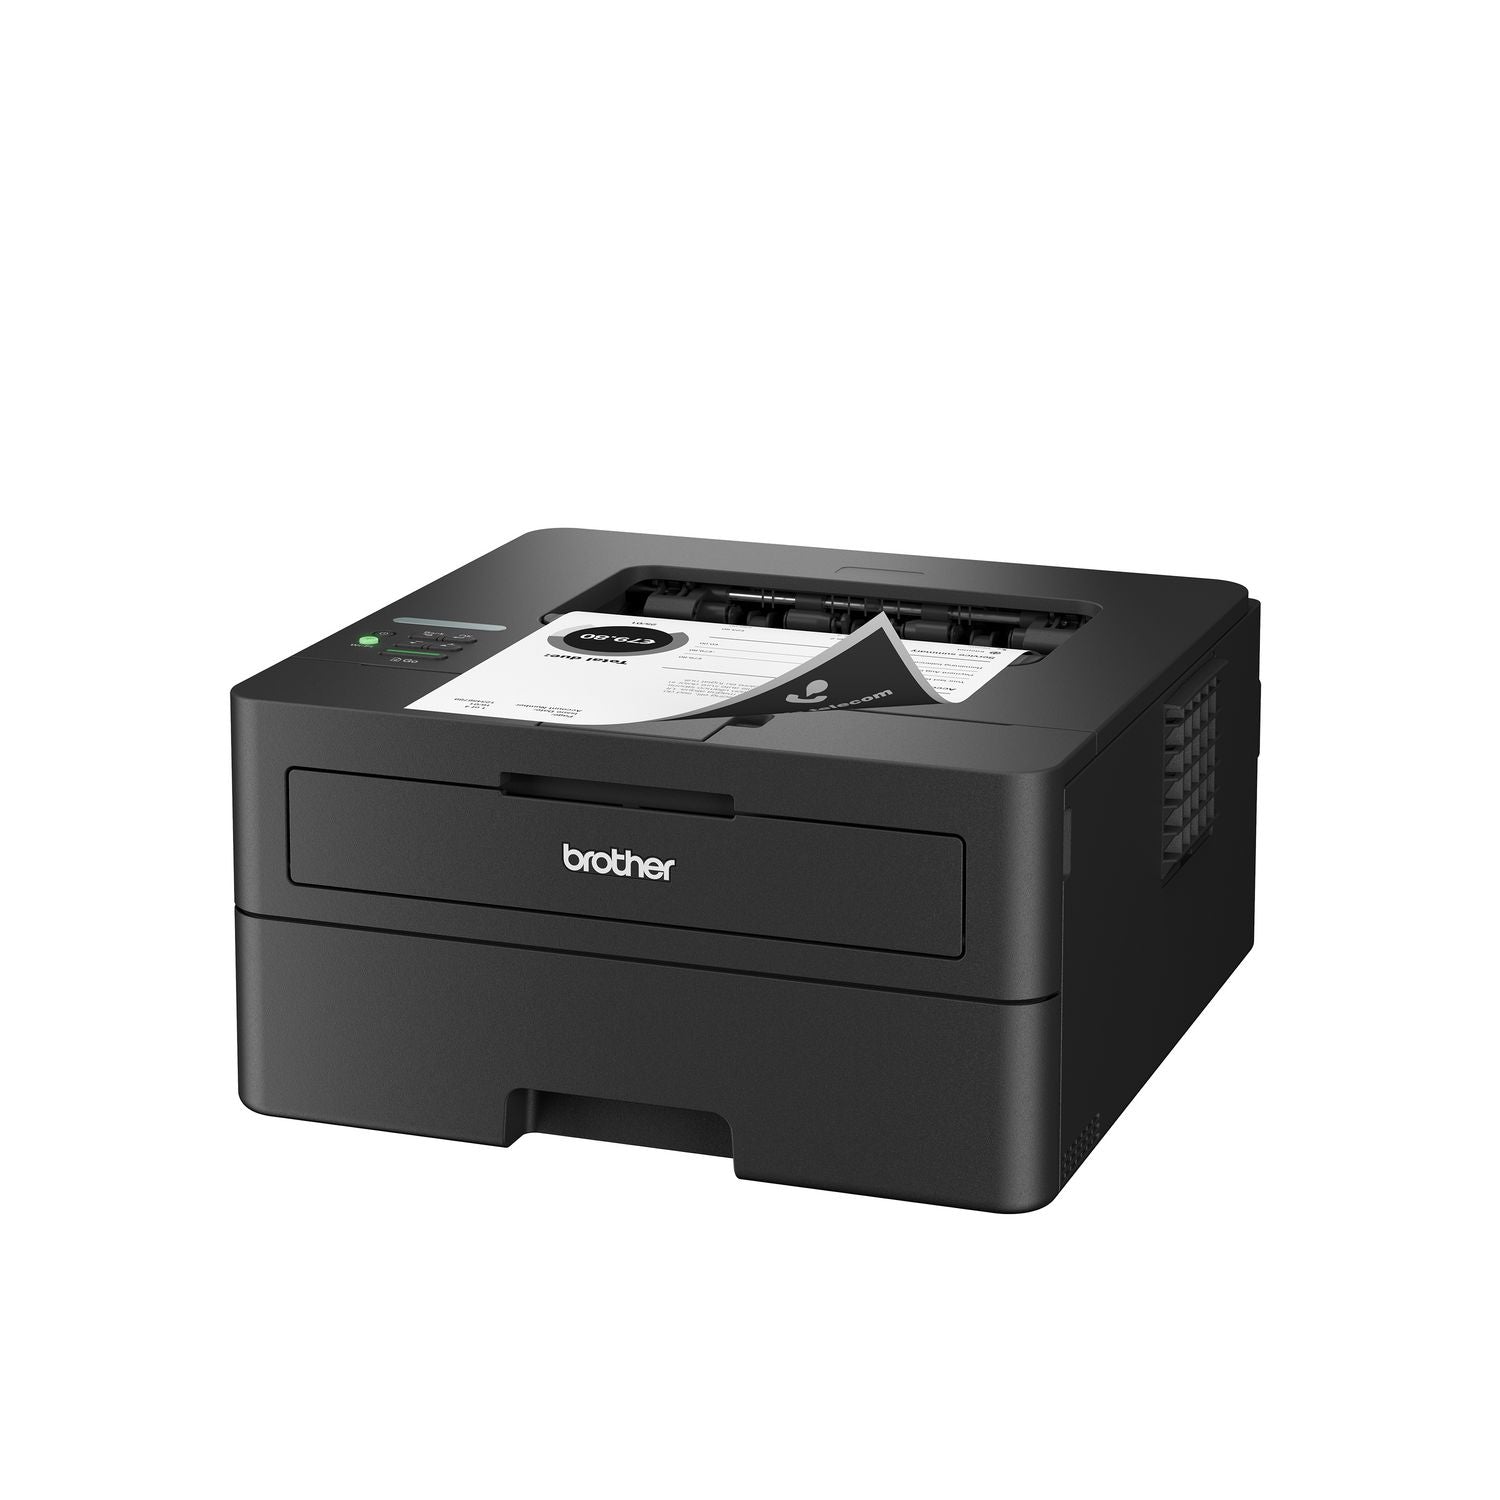 Brother DCP-L2640DW Wireless Compact Monochrome Multifunction Laser Printer, Copy/Print/Scan